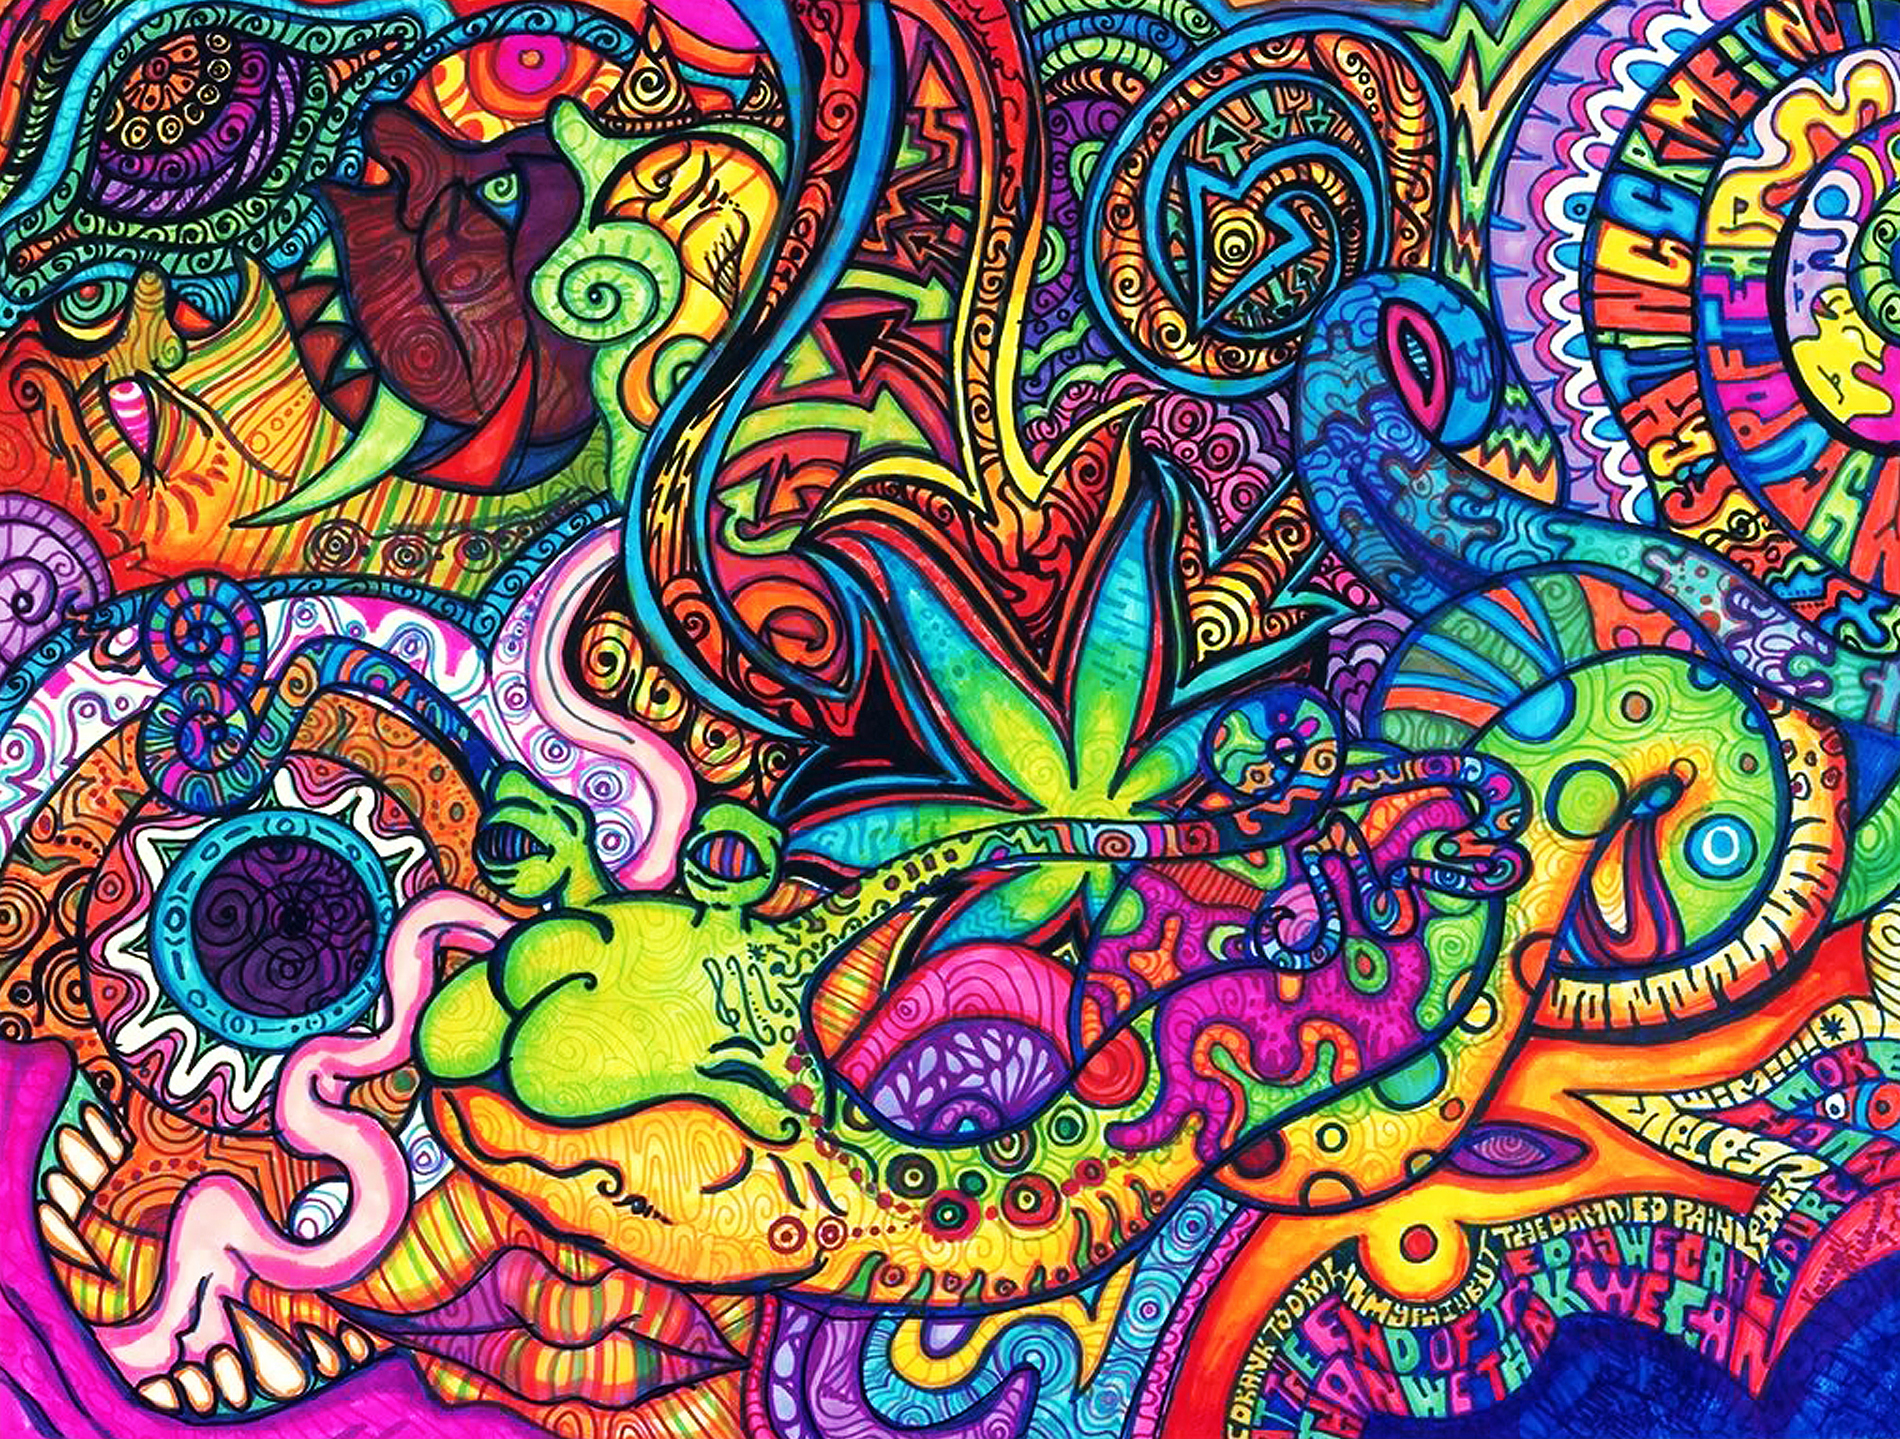 521 Psychedelic HD Wallpapers Backgrounds - Wallpaper Abyss